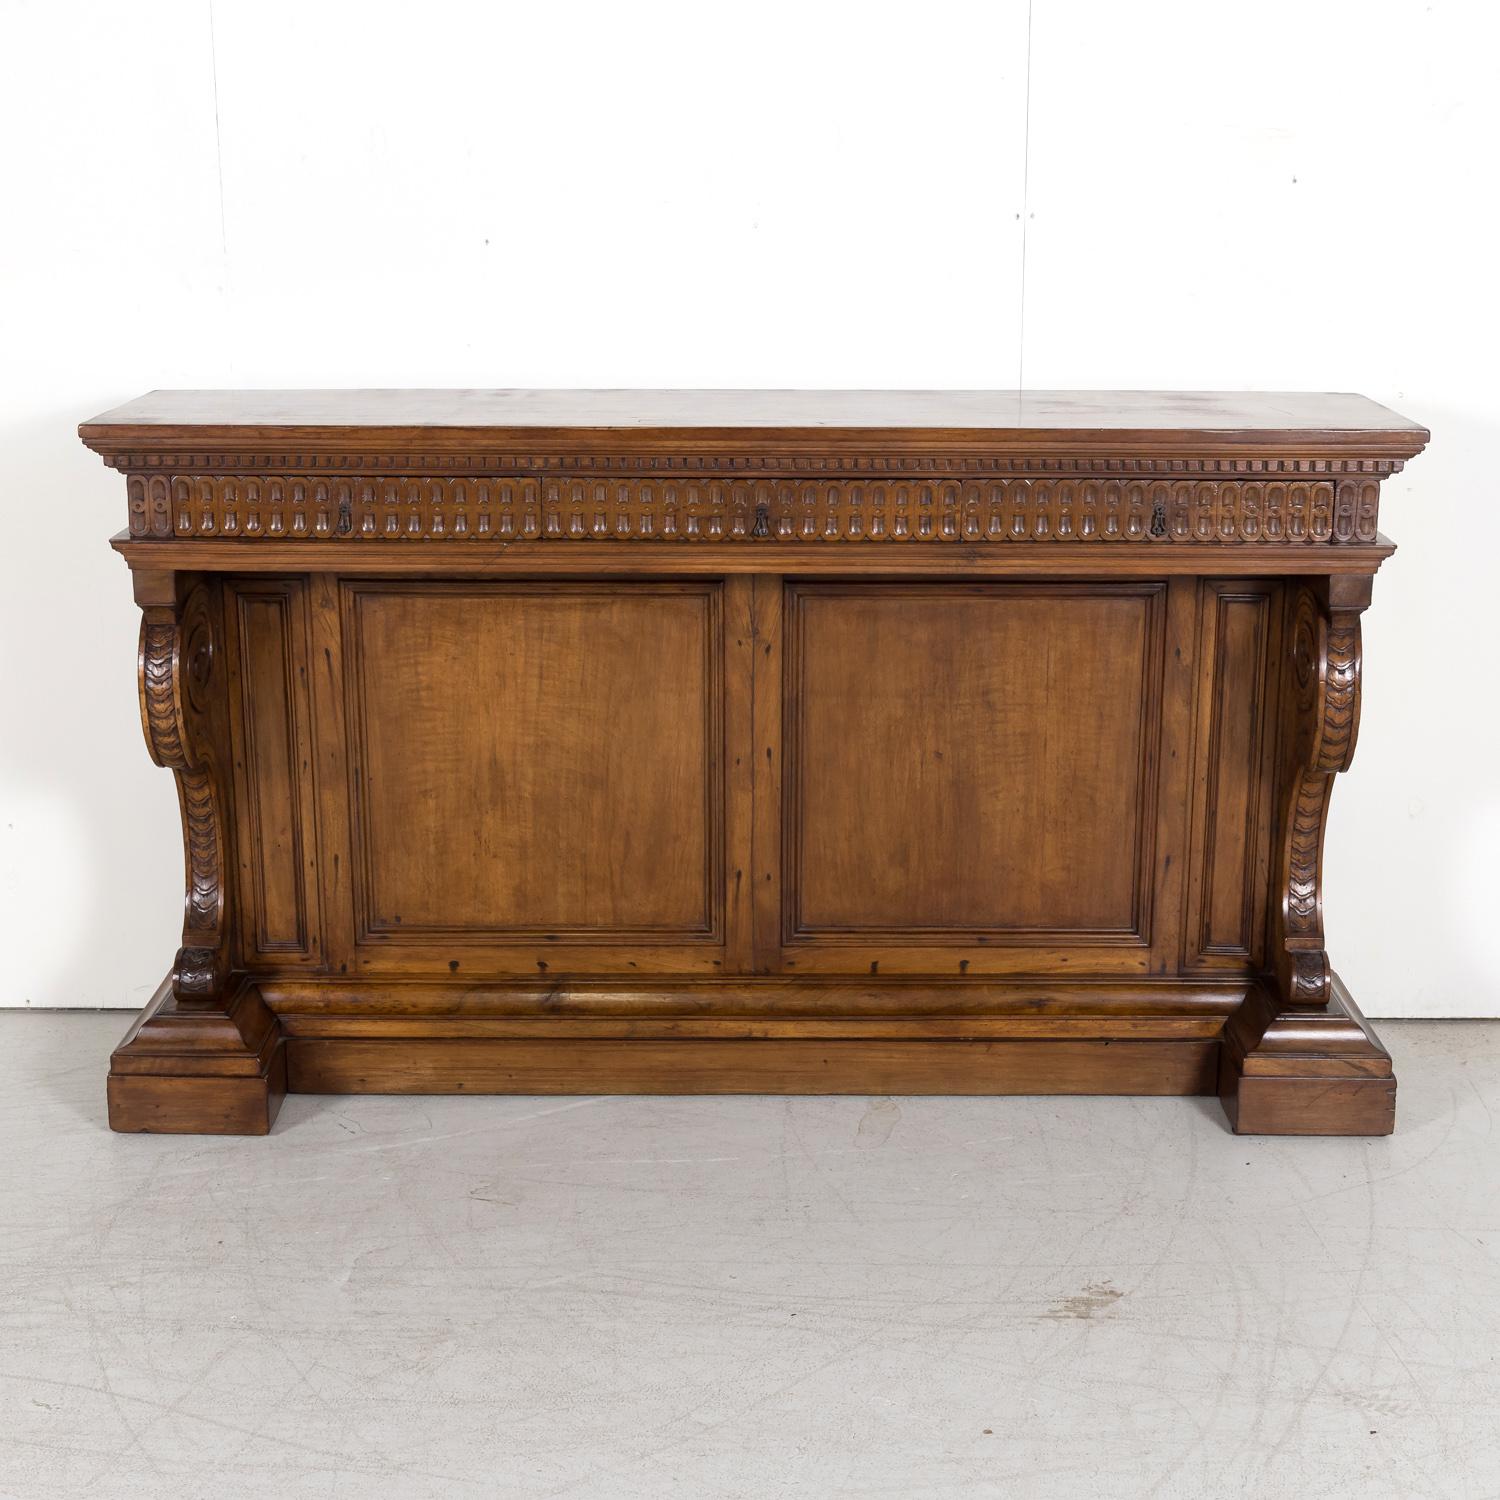 A handsome 19th Century Spanish Renaissance style carved walnut console from the Catalan region, circa 1890s, having a rectangular plank top above a frieze with dentil molding over three drawers with original iron drop handles. Below is molded panel